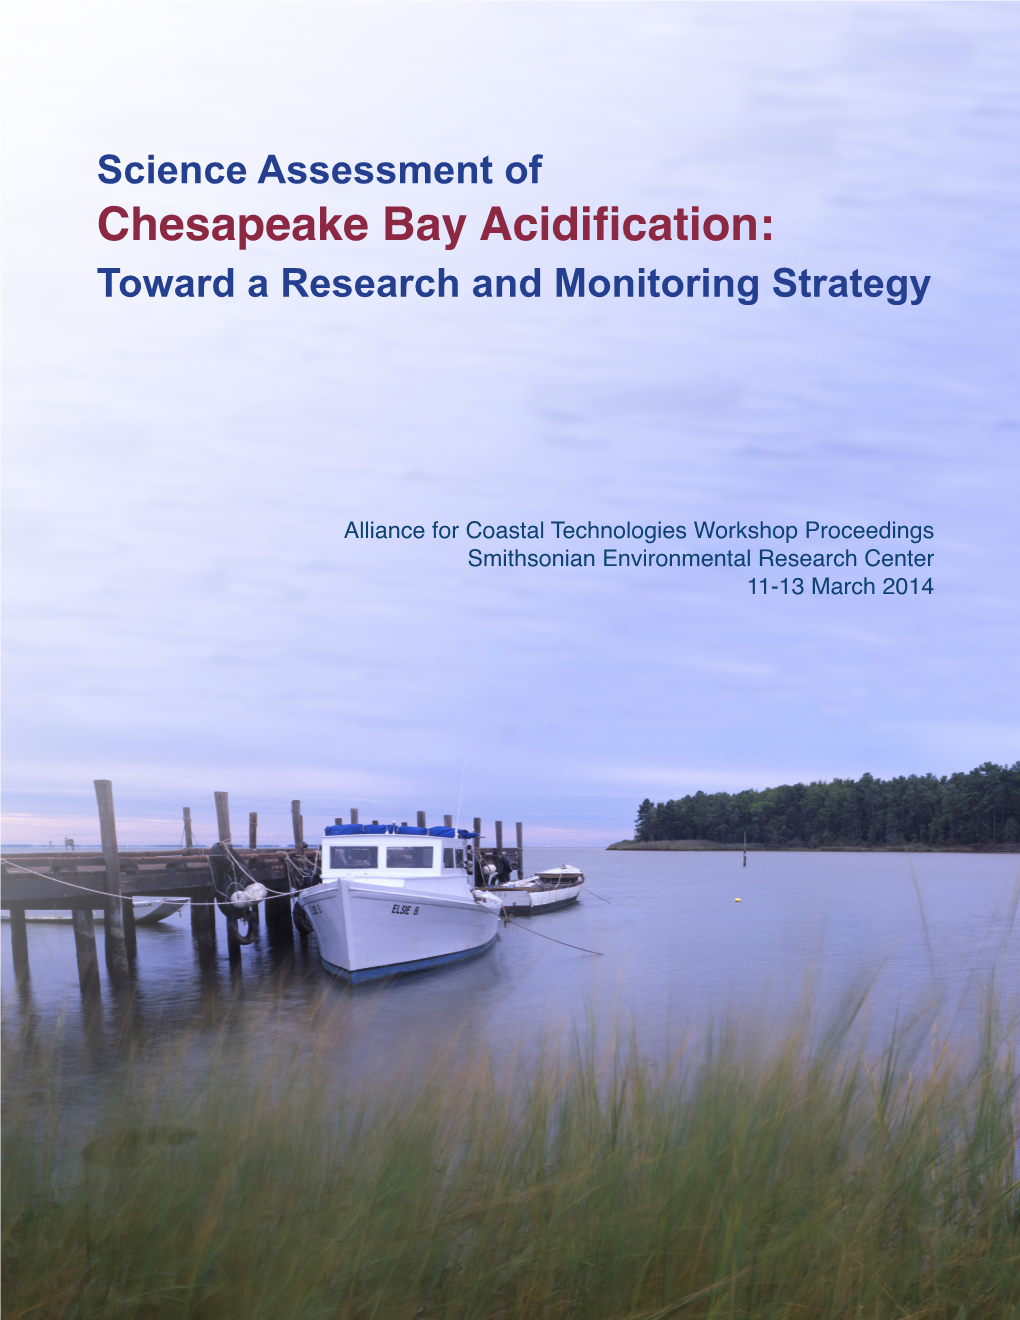 Science Assessment of Chesapeake Bay Acidification: Toward a Research and Monitoring Strategy